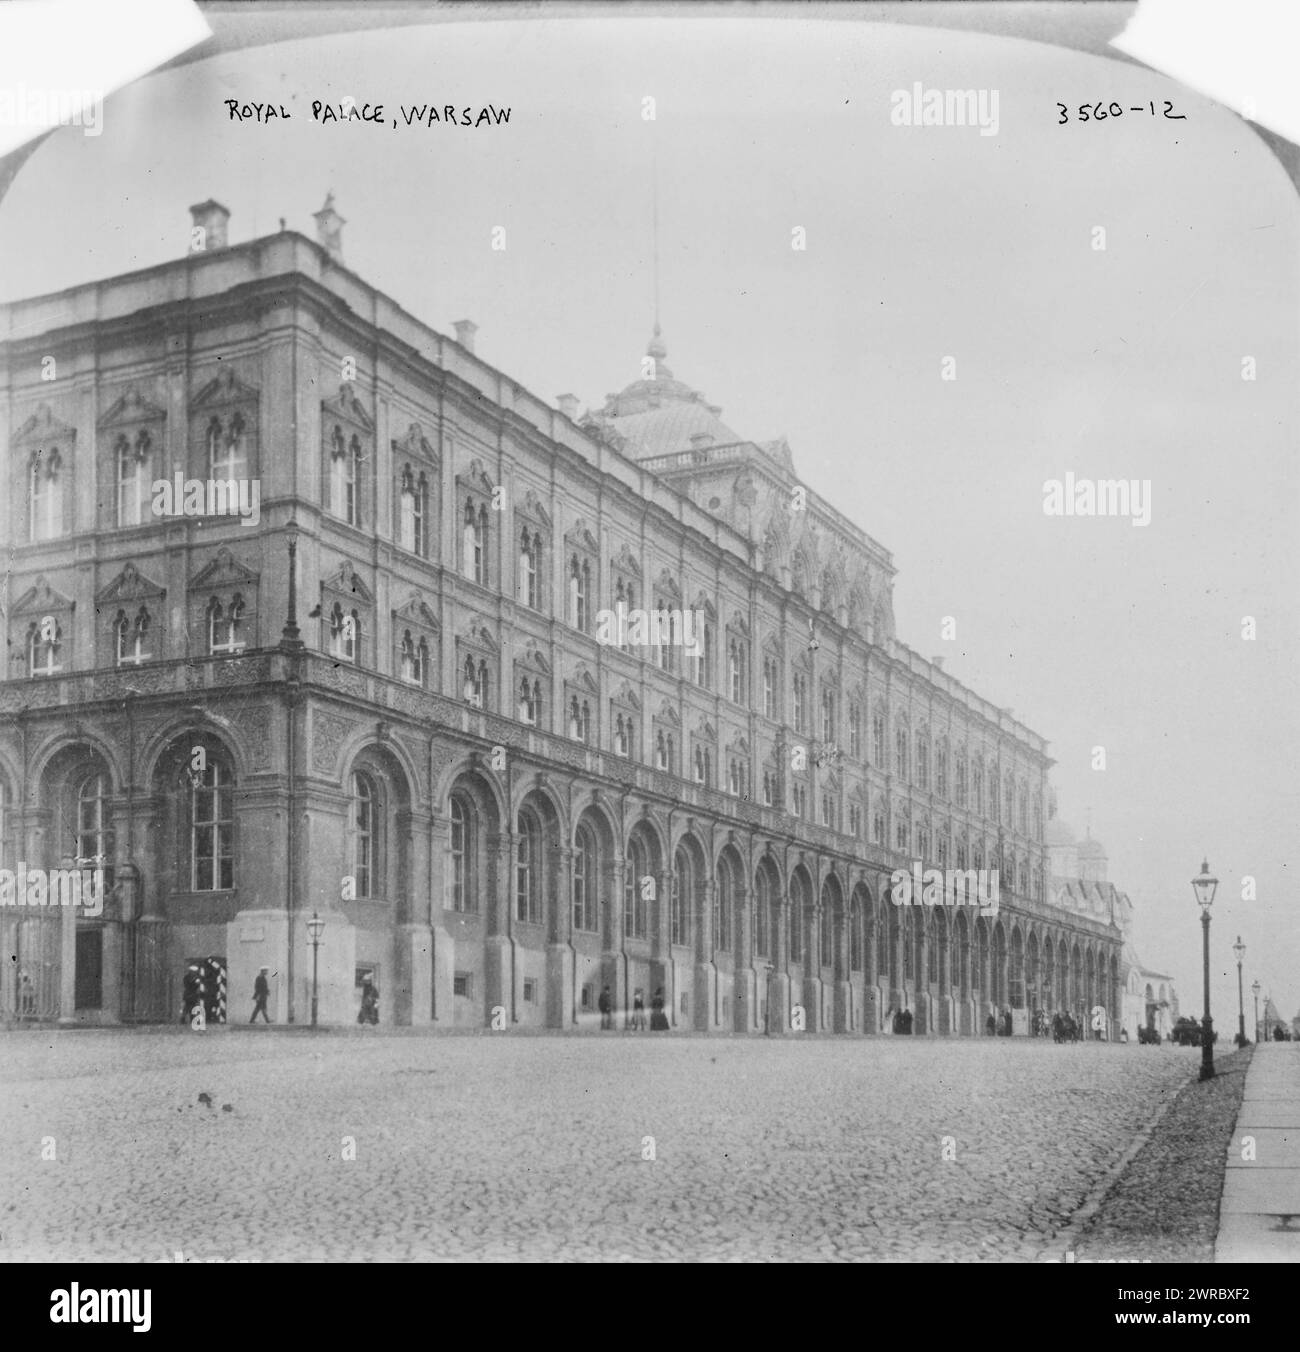 Royal Palace, Warsaw i.e. Kremlin Palace, Moscow, Russia, between ca. 1910 and ca. 1915, Moscow, Glass negatives, 1 negative: glass Stock Photo